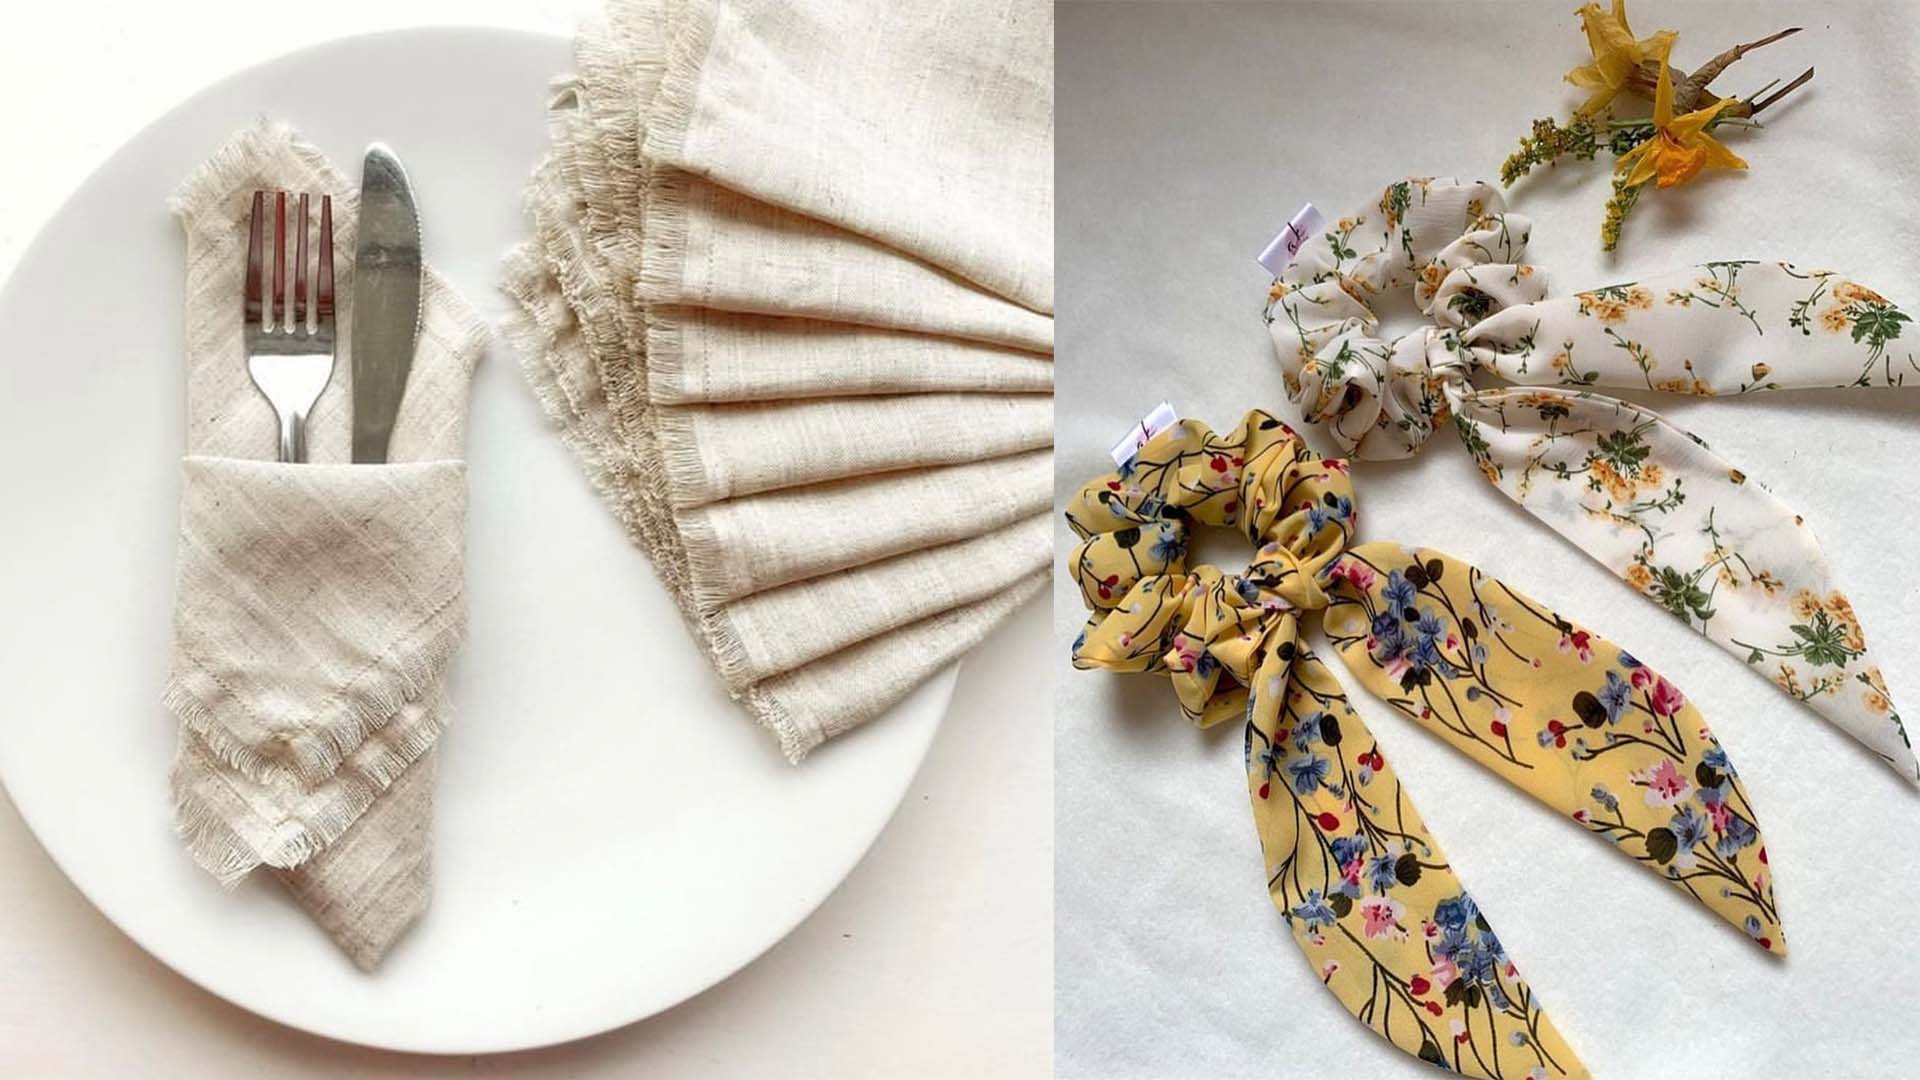 brighton fabric shop cloth control shows off customers creations with this linen napkin set and viscose scrunchies